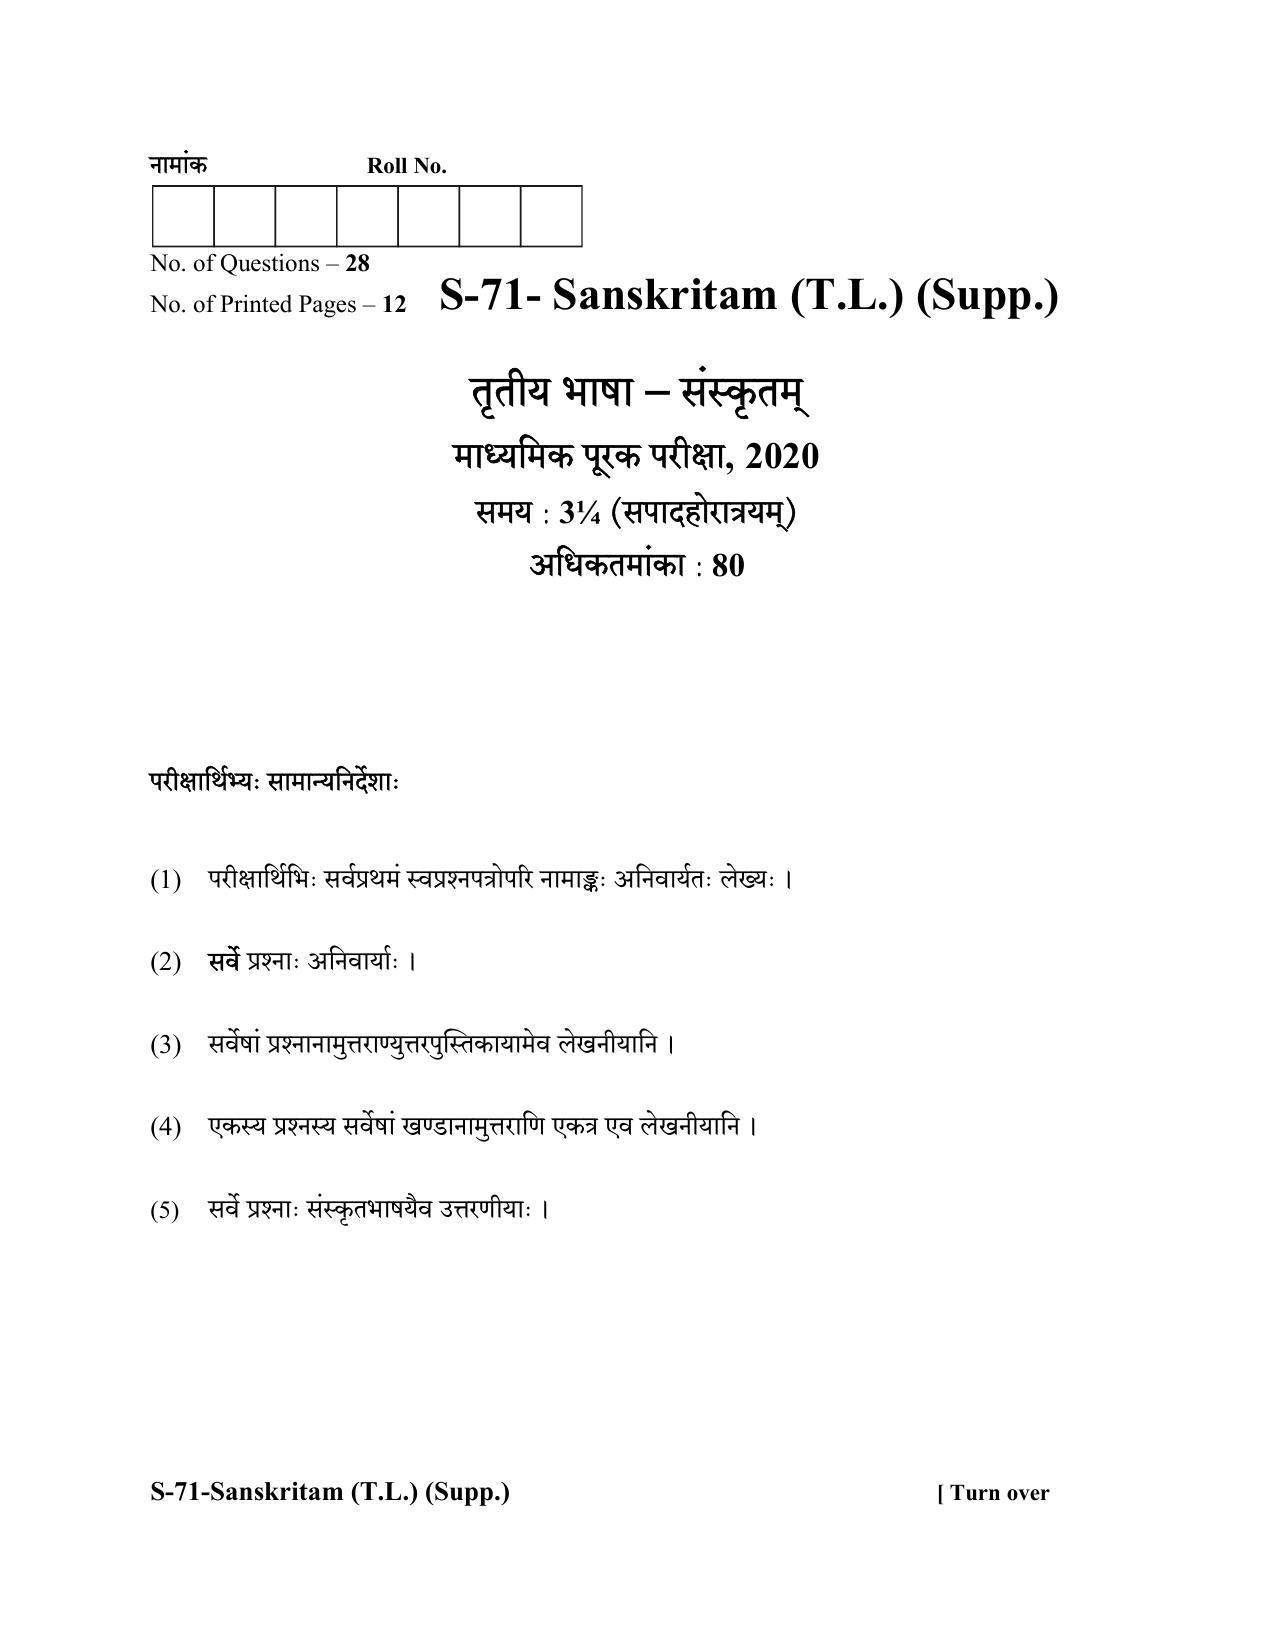 RBSE Class 10 Sanskrit TL Supplementary 2020 Question Paper - Page 1